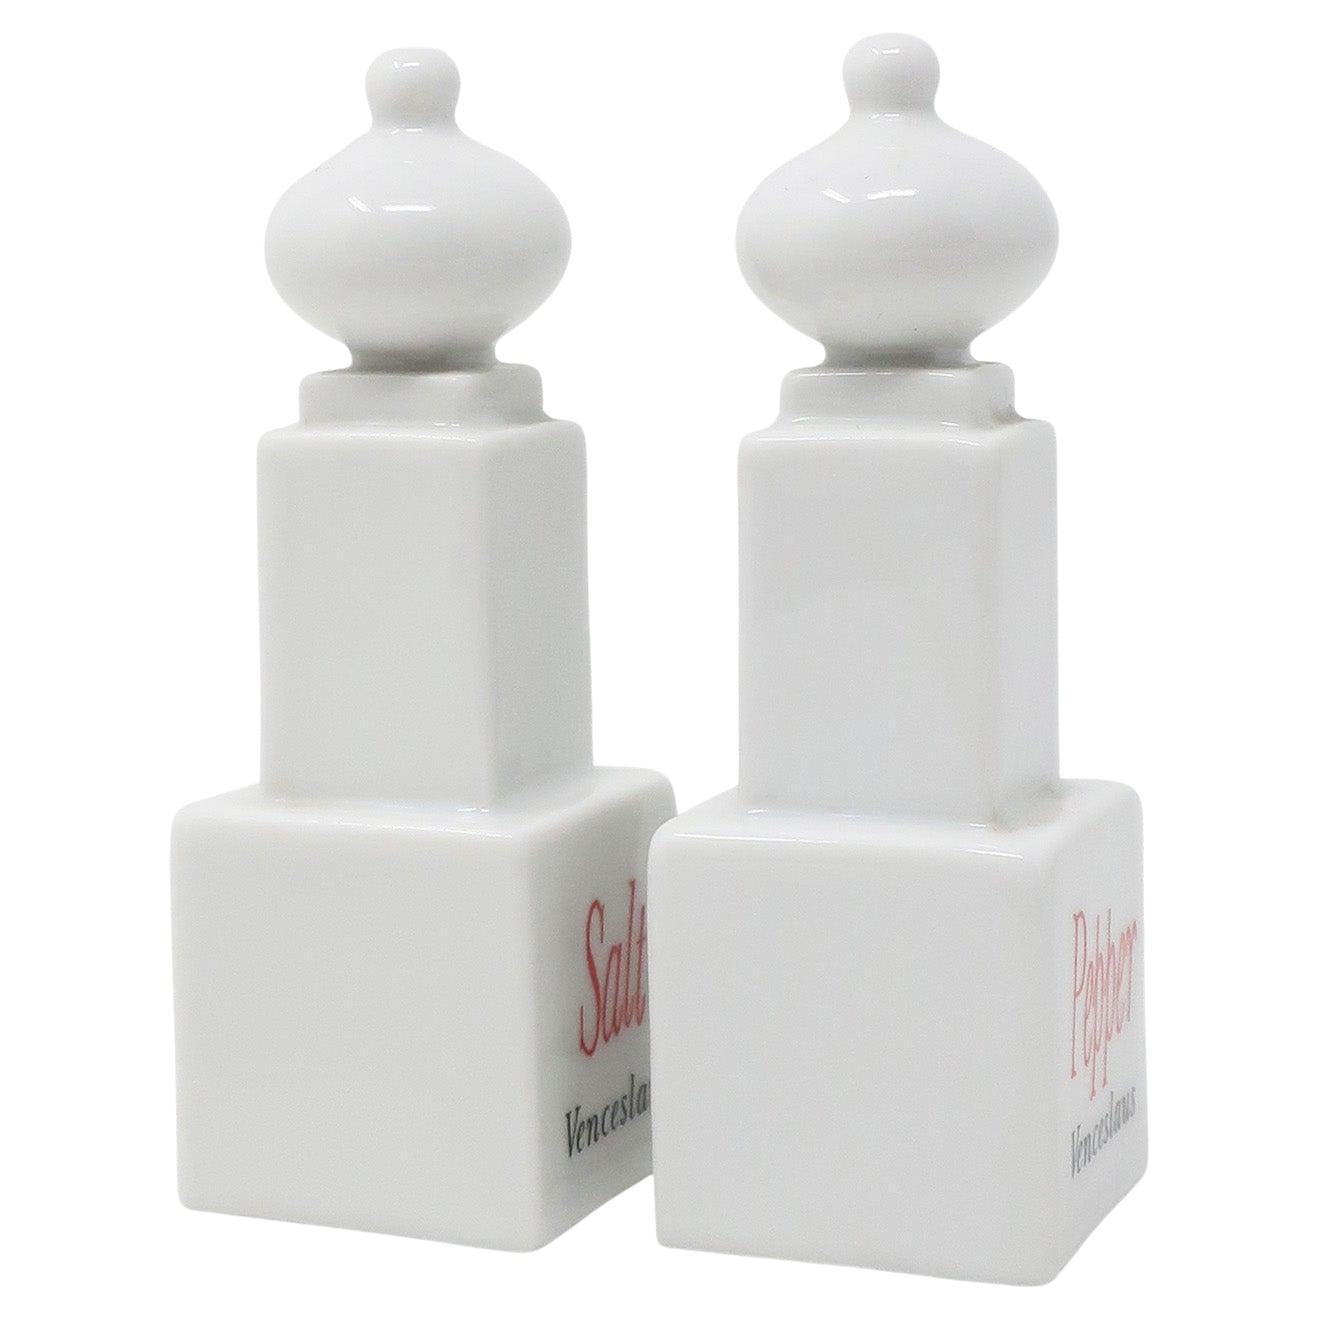 Porcelain Monumenti Salt & Pepper Shakers by Matteo Thun for Arzberg, 1987 For Sale